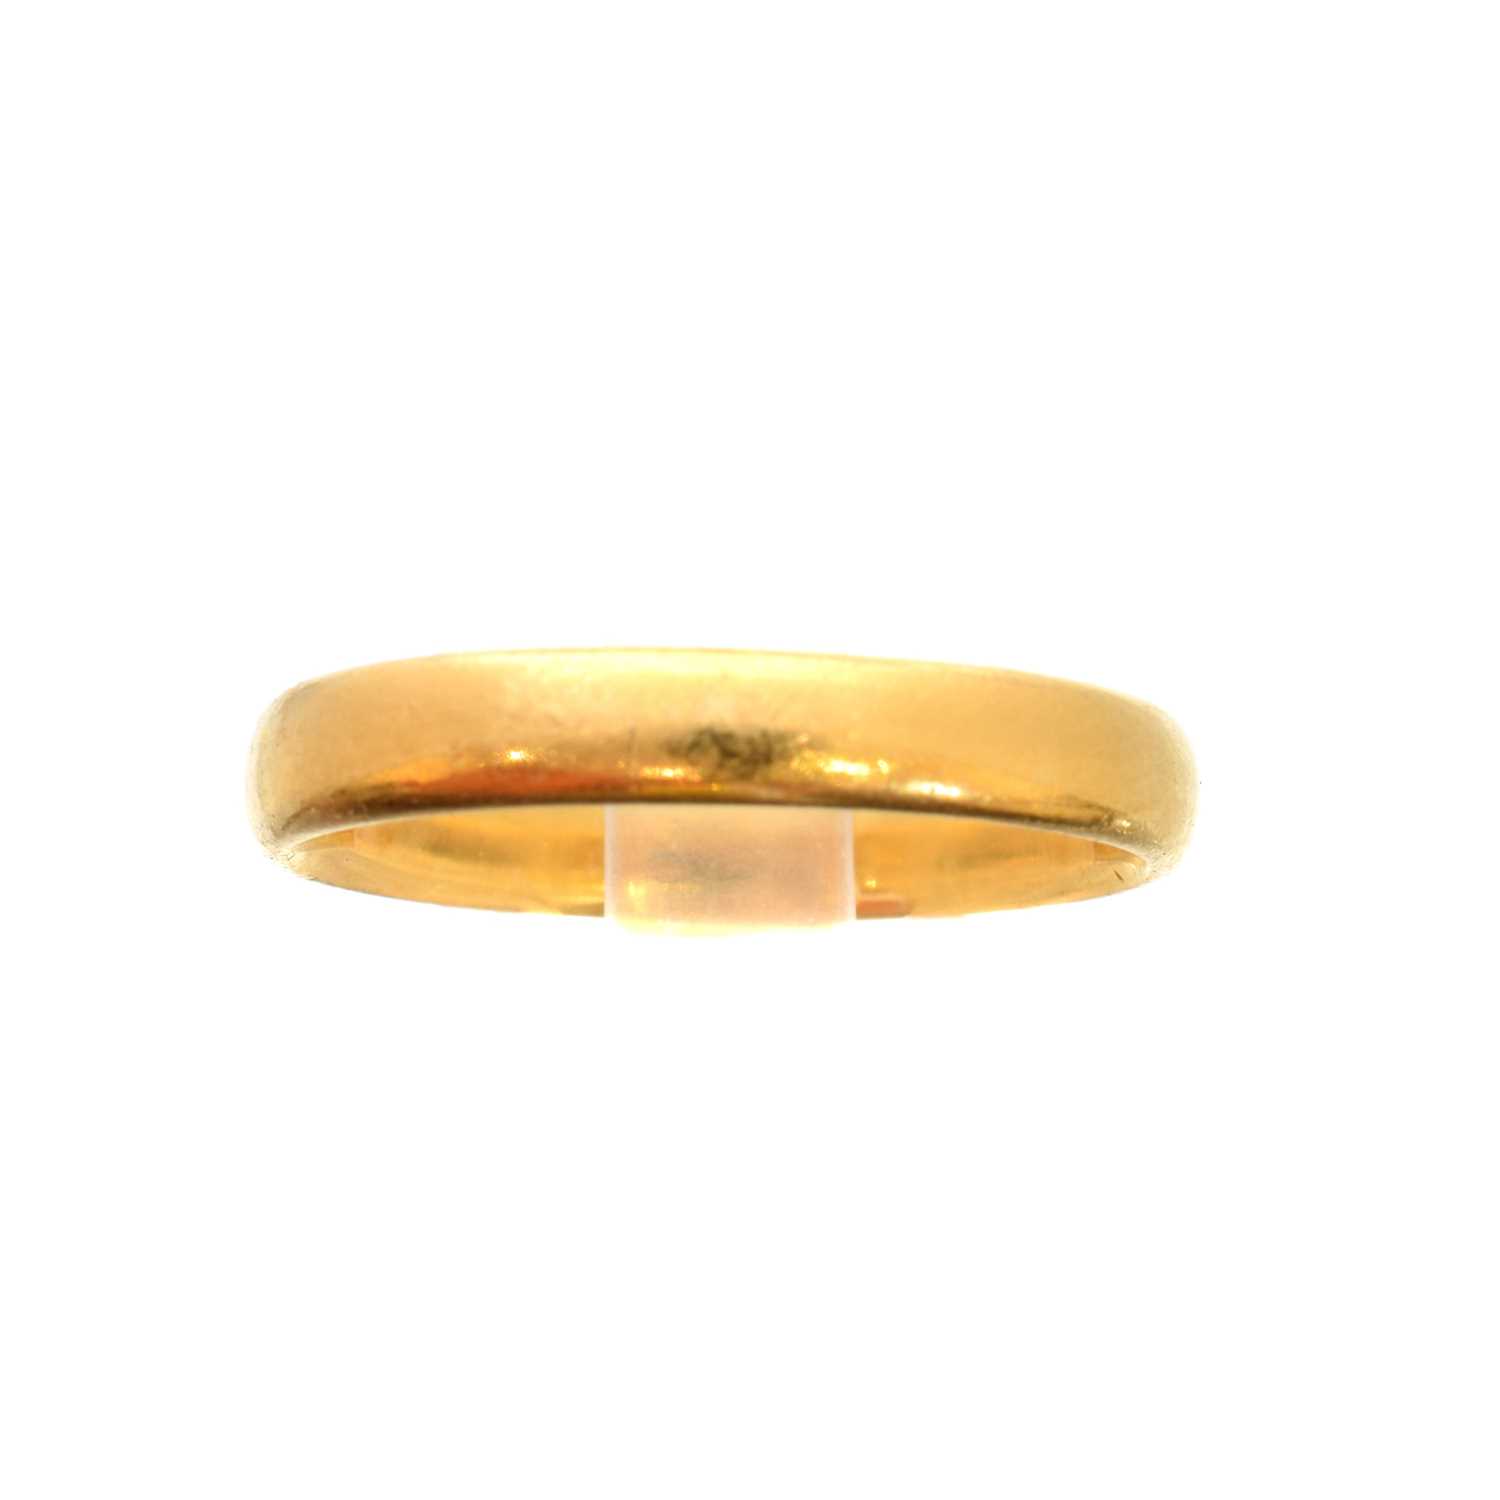 Lot 91 - A 22ct gold band ring